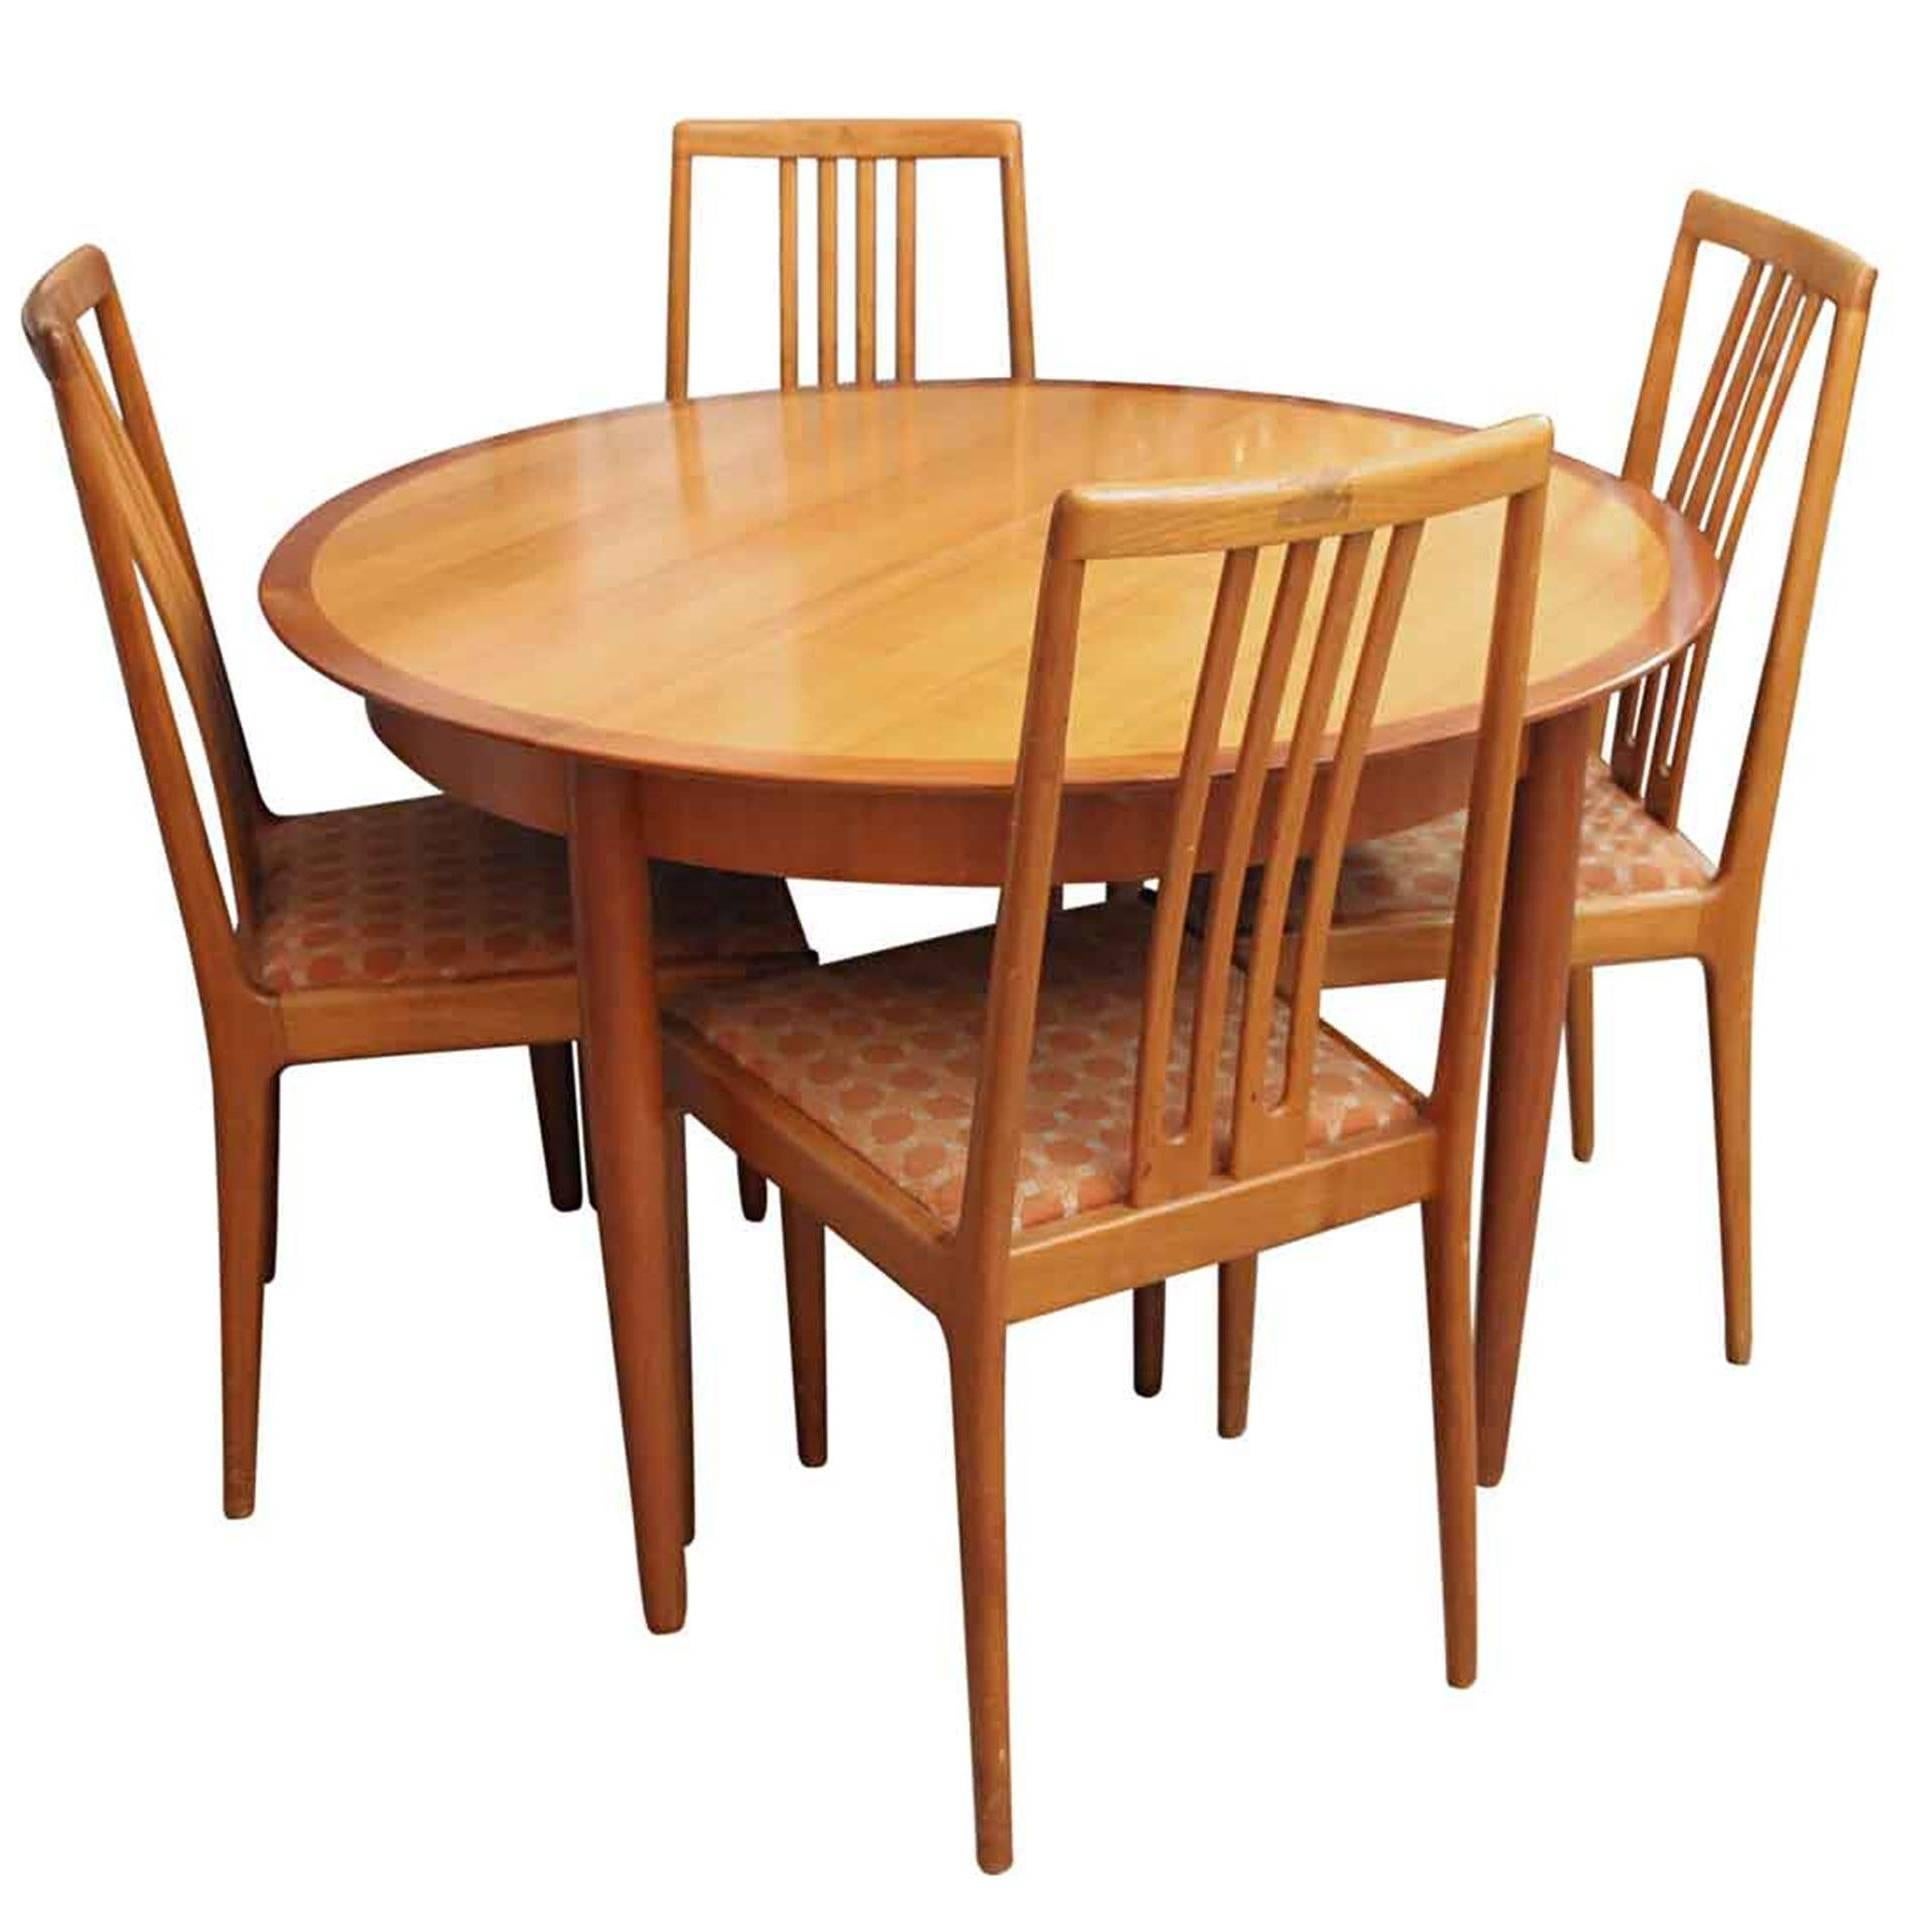 1960s Mid-Century Modern Extendable Round Table Set with Five Chairs